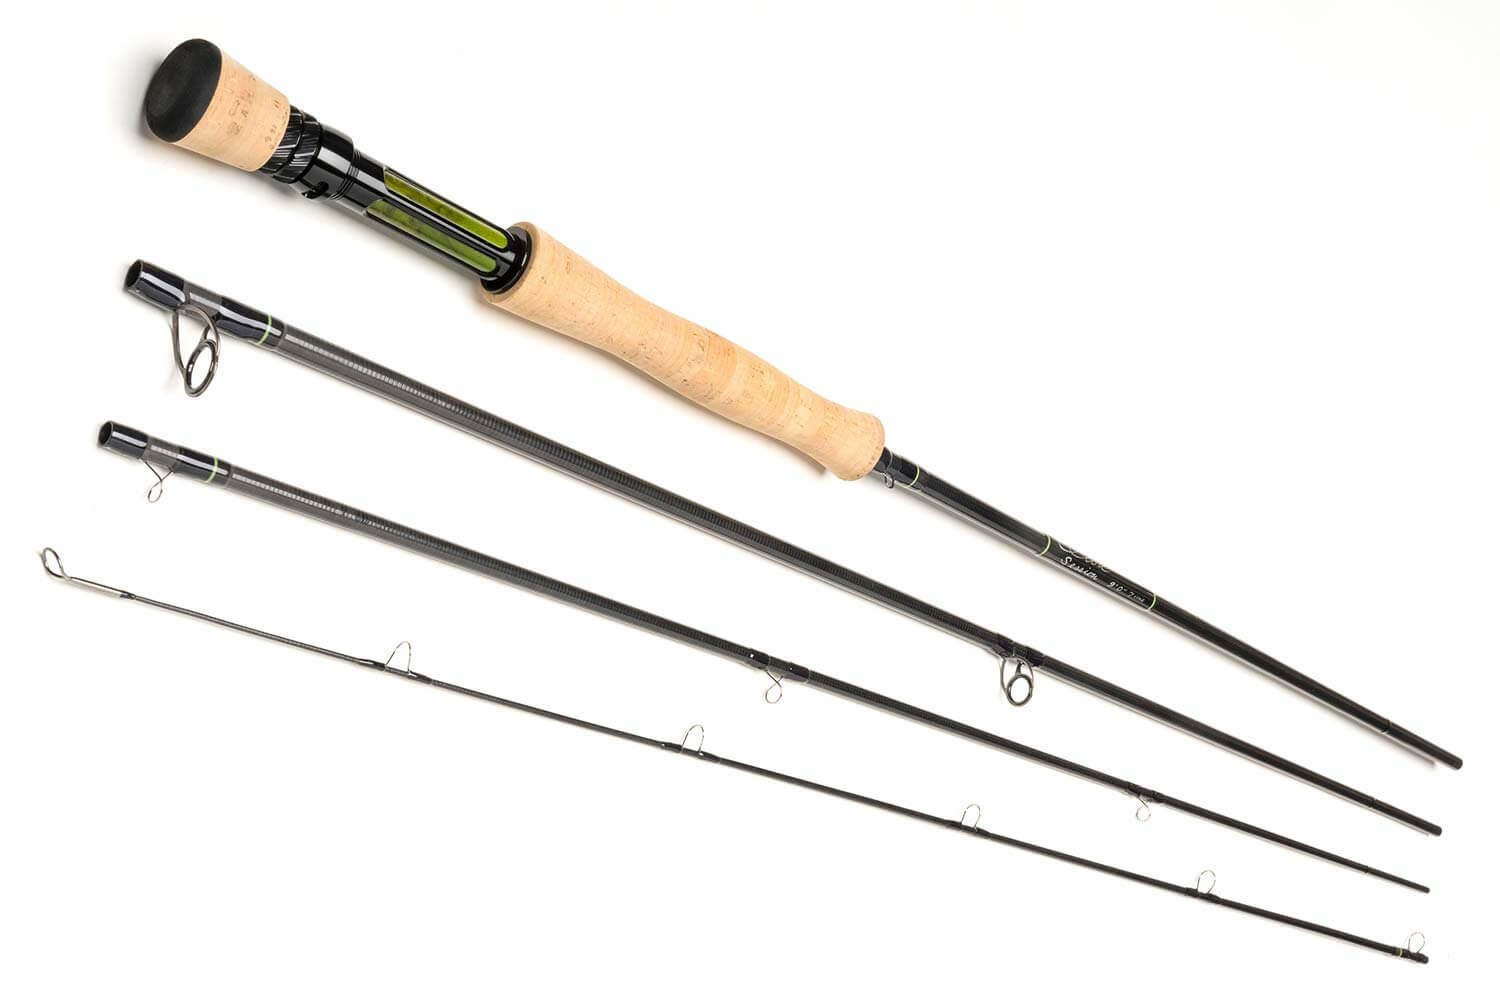 Telescoping Fishing Rod: Review of Martin Caddis Creek 9' Fly